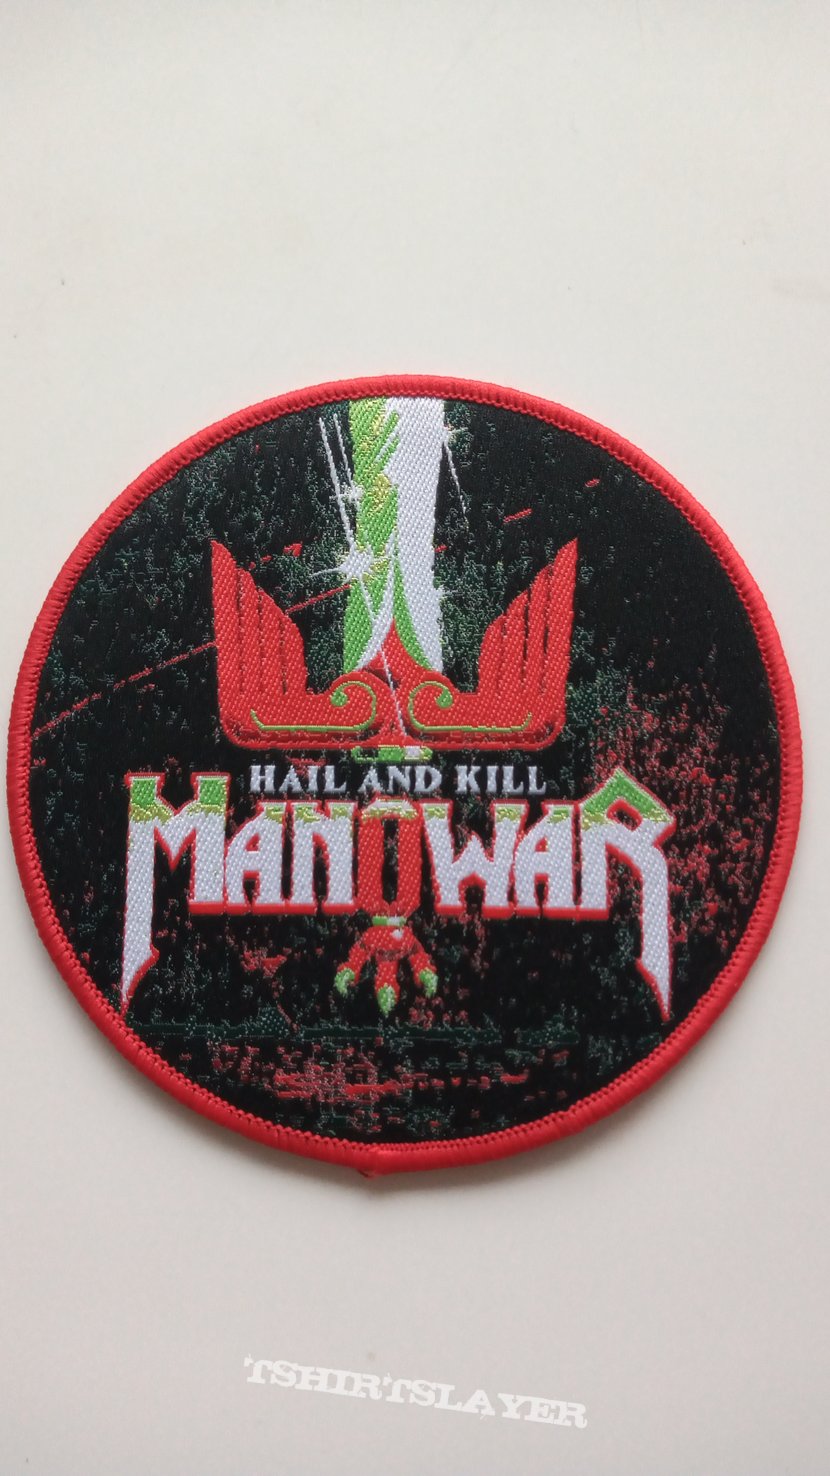 Manowar hail and kill  patch m390 red border